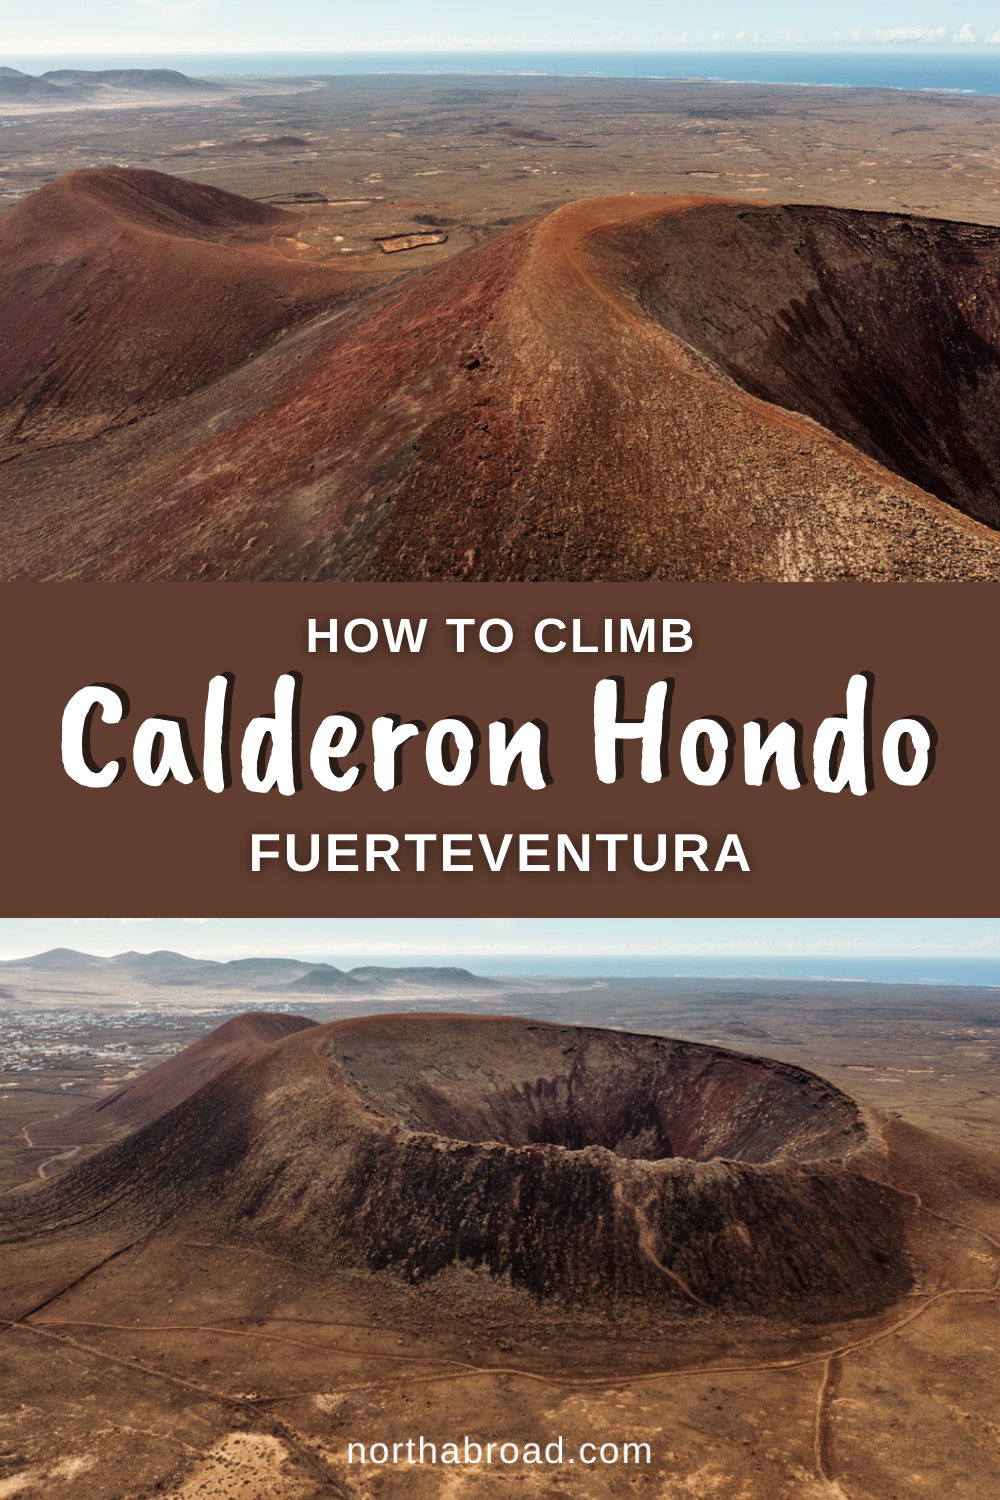 All you need to know about hiking the Calderon Hondo volcano in Fuerteventura and what to expect of the impressive volcanic caldera